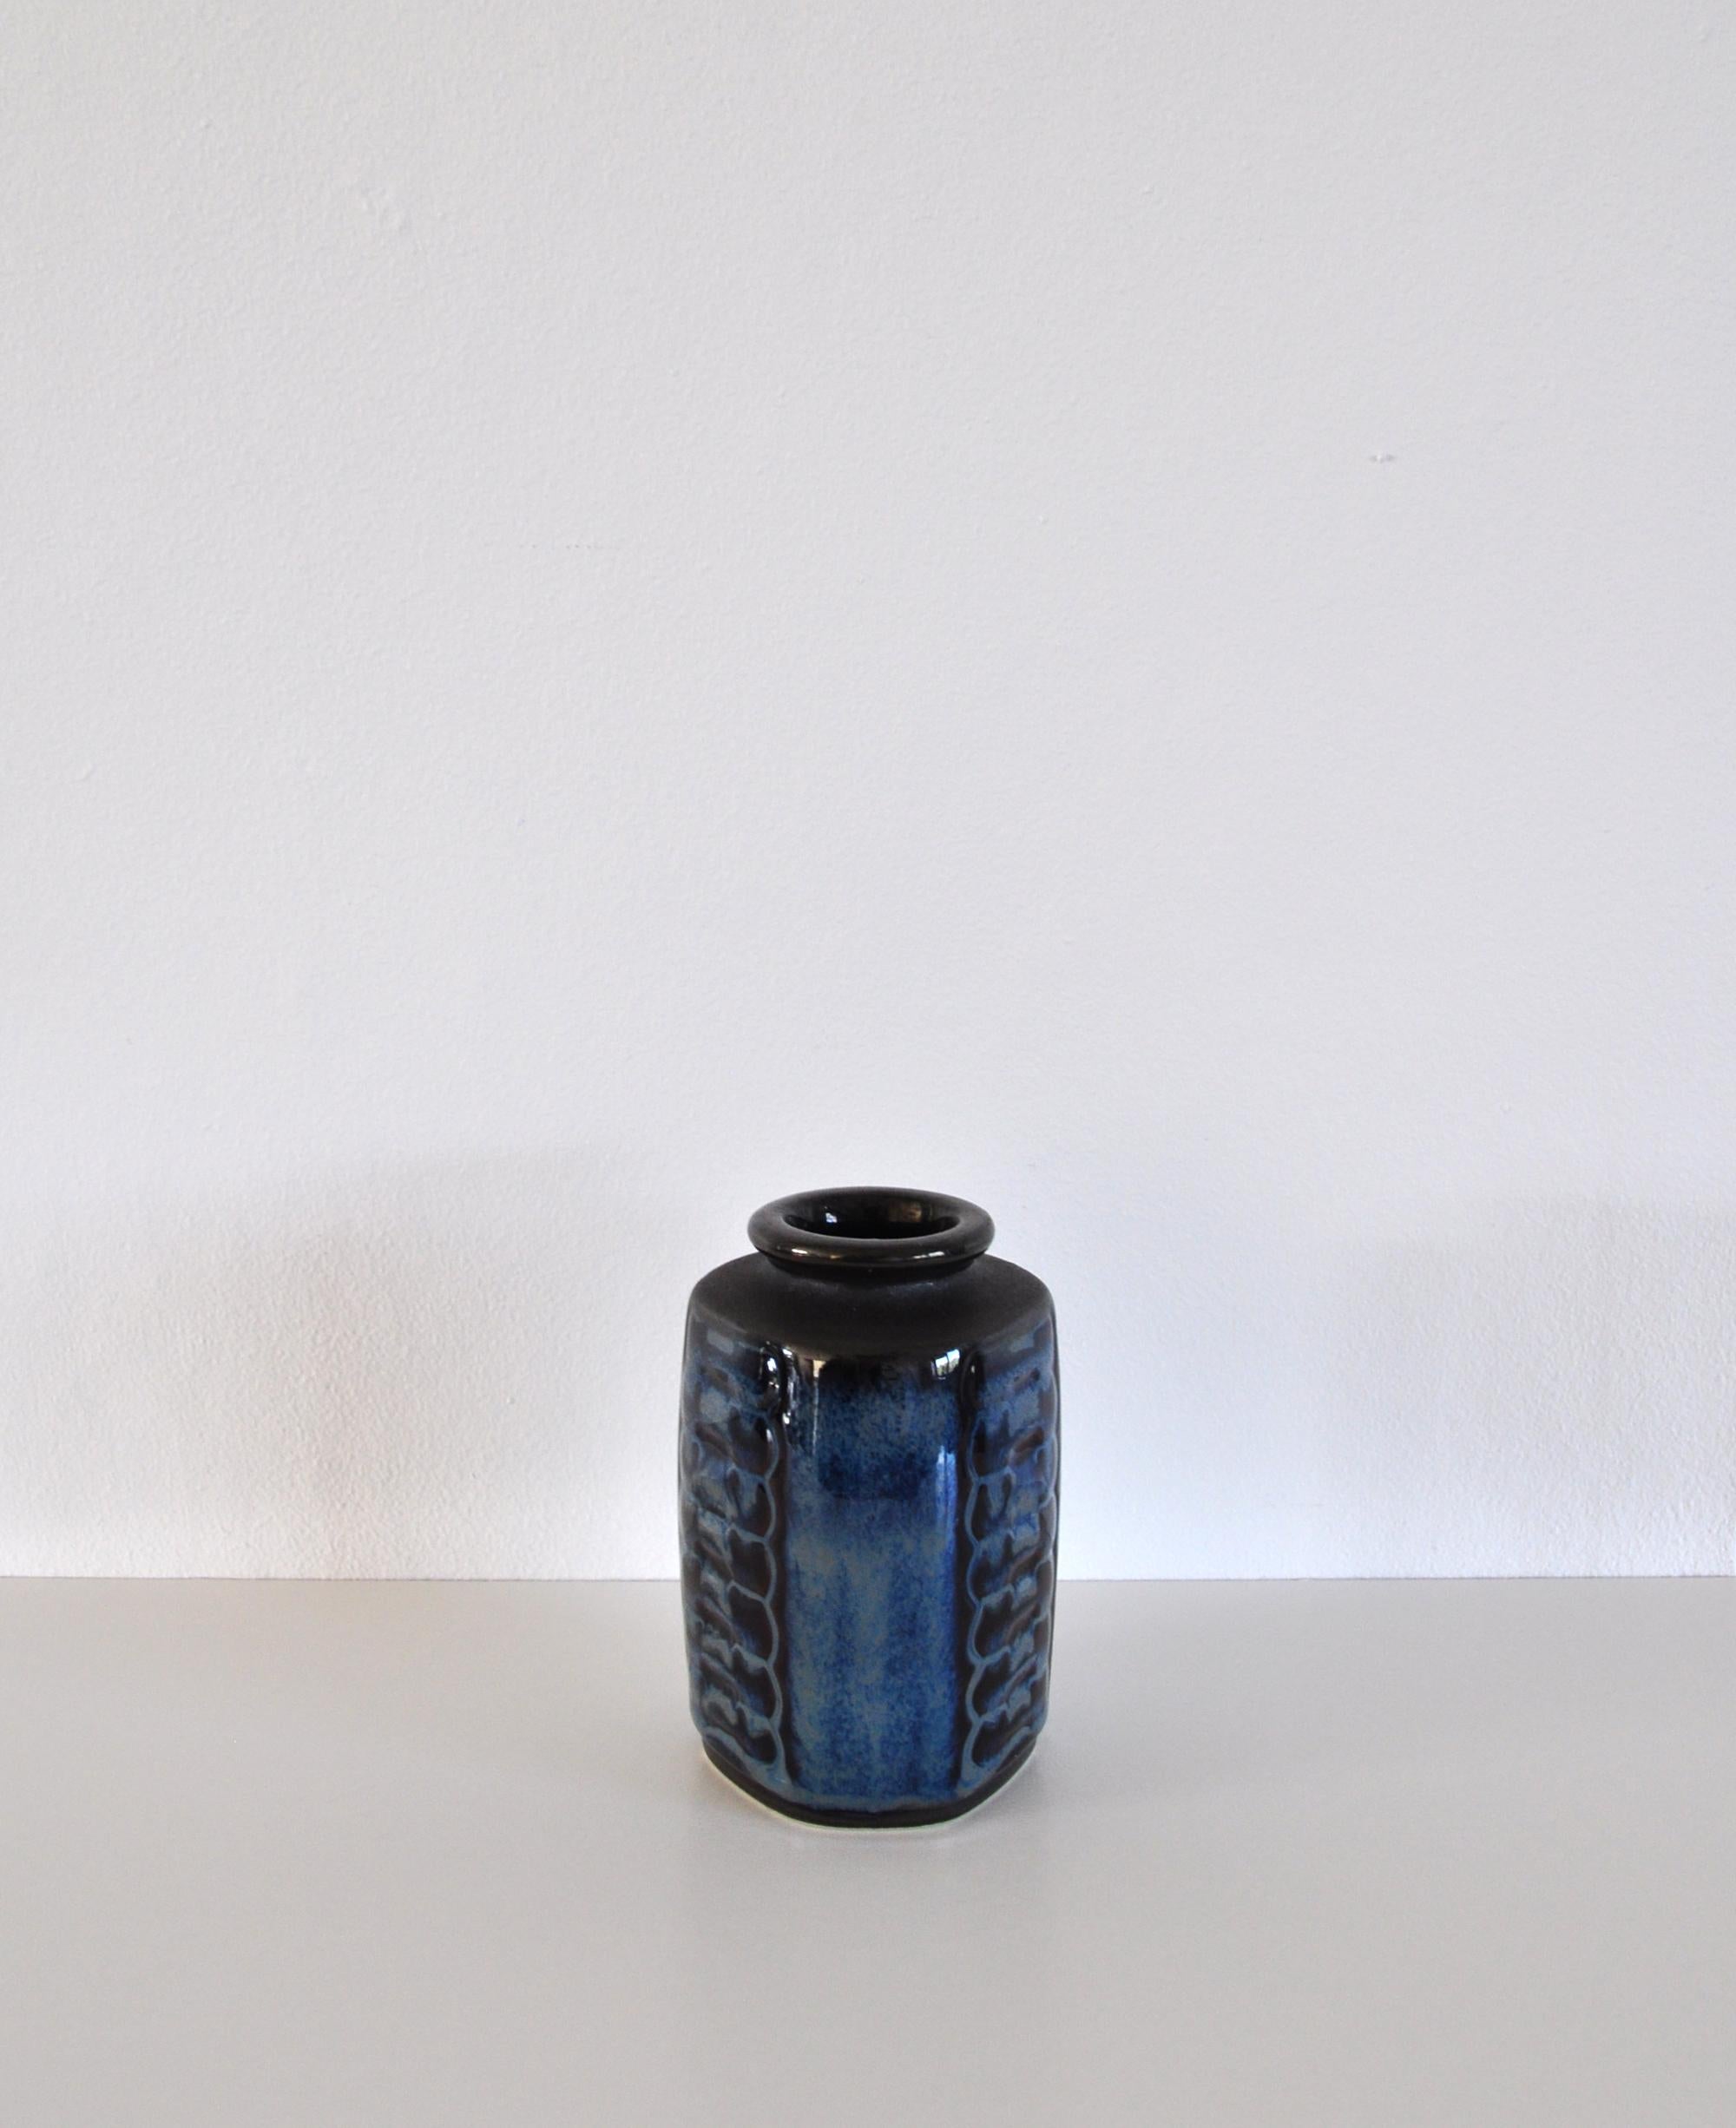 Stoneware vase designed by Einar Johansen for Søholm, 1960s. Glaze in various blue tones. Stamp from the maker on the bottom.
Excellent condition.